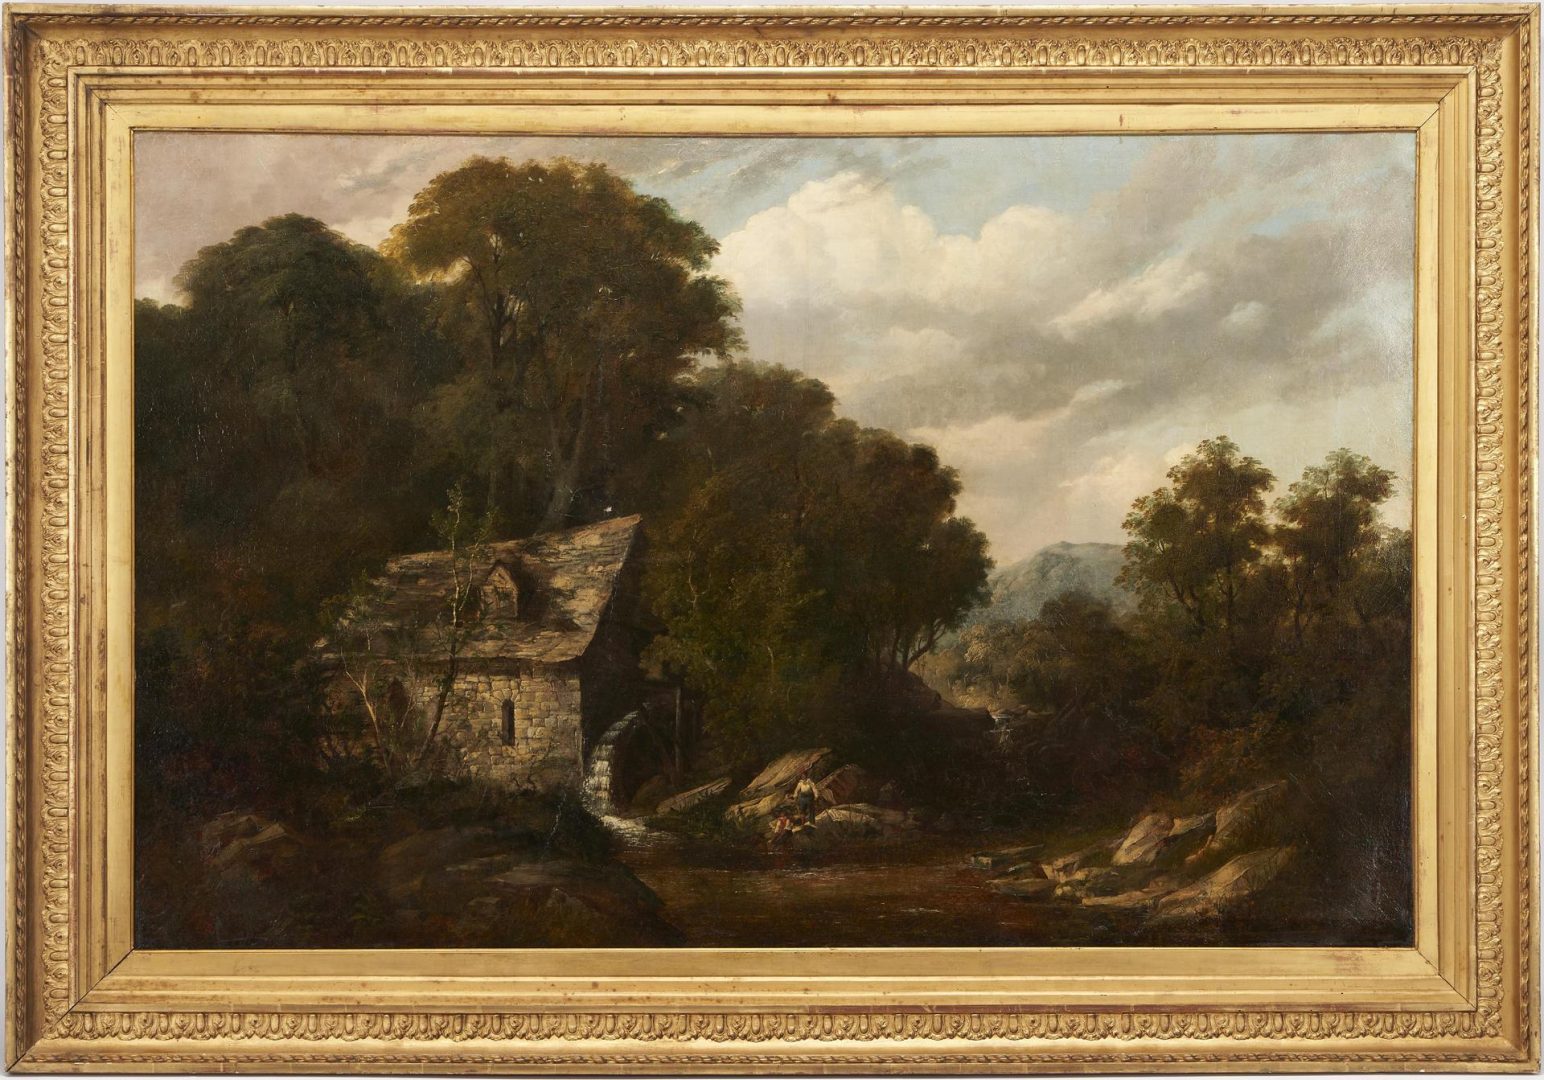 Lot 450: British School, 19th C. O/C Landscape "Figures by a Mill"